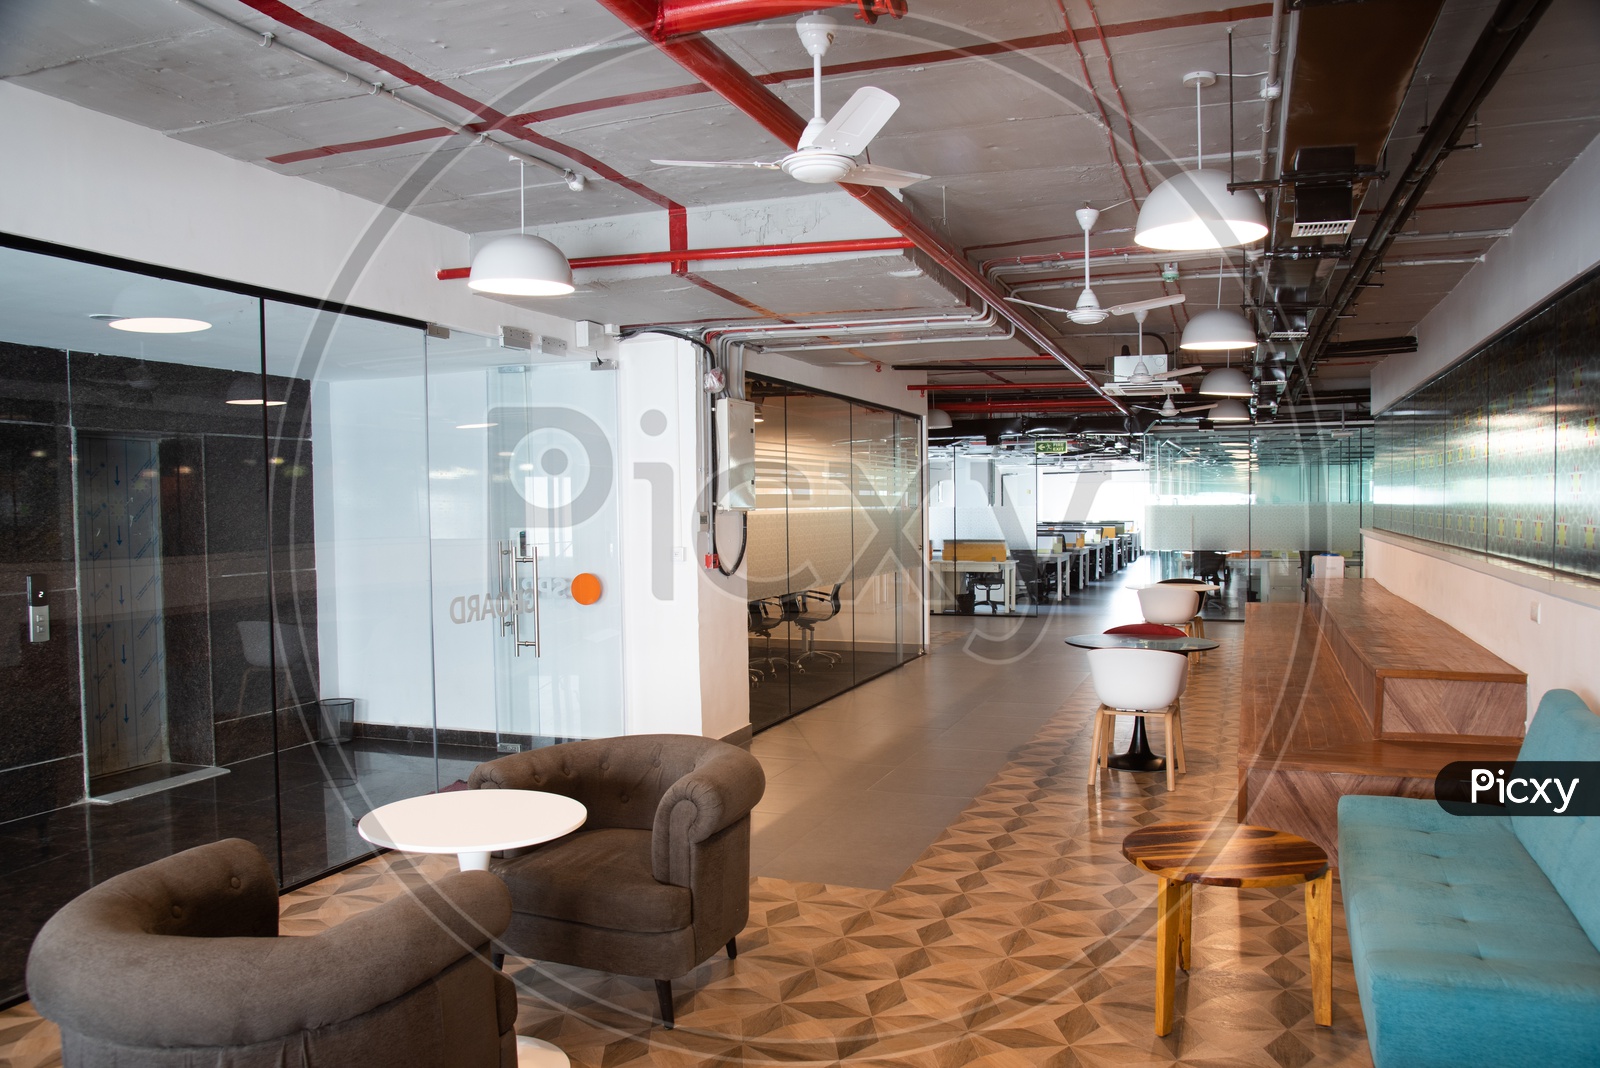 Coworking Spaces, Corporate Office Work Spaces, Recreation Lounge